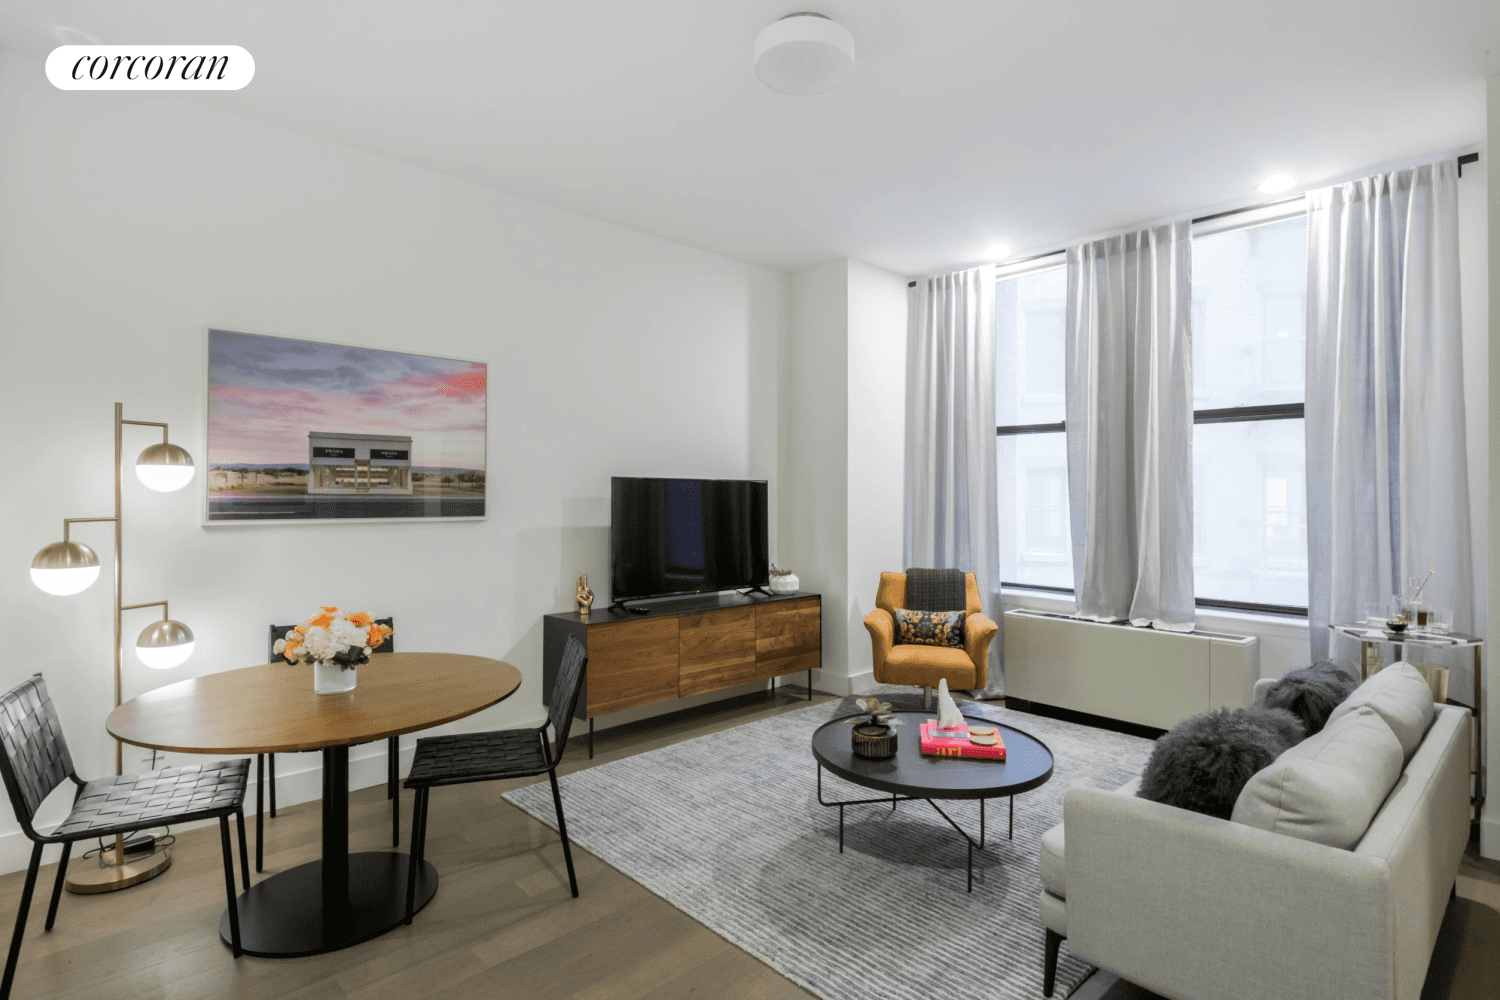 IMMEDIATE OCCUPANCY. Welcome to the Broad Exchange Building, where the timeless grandeur of New York's storied past meets spacious, sophisticated, and modern residences that are ideal for contemporary living.